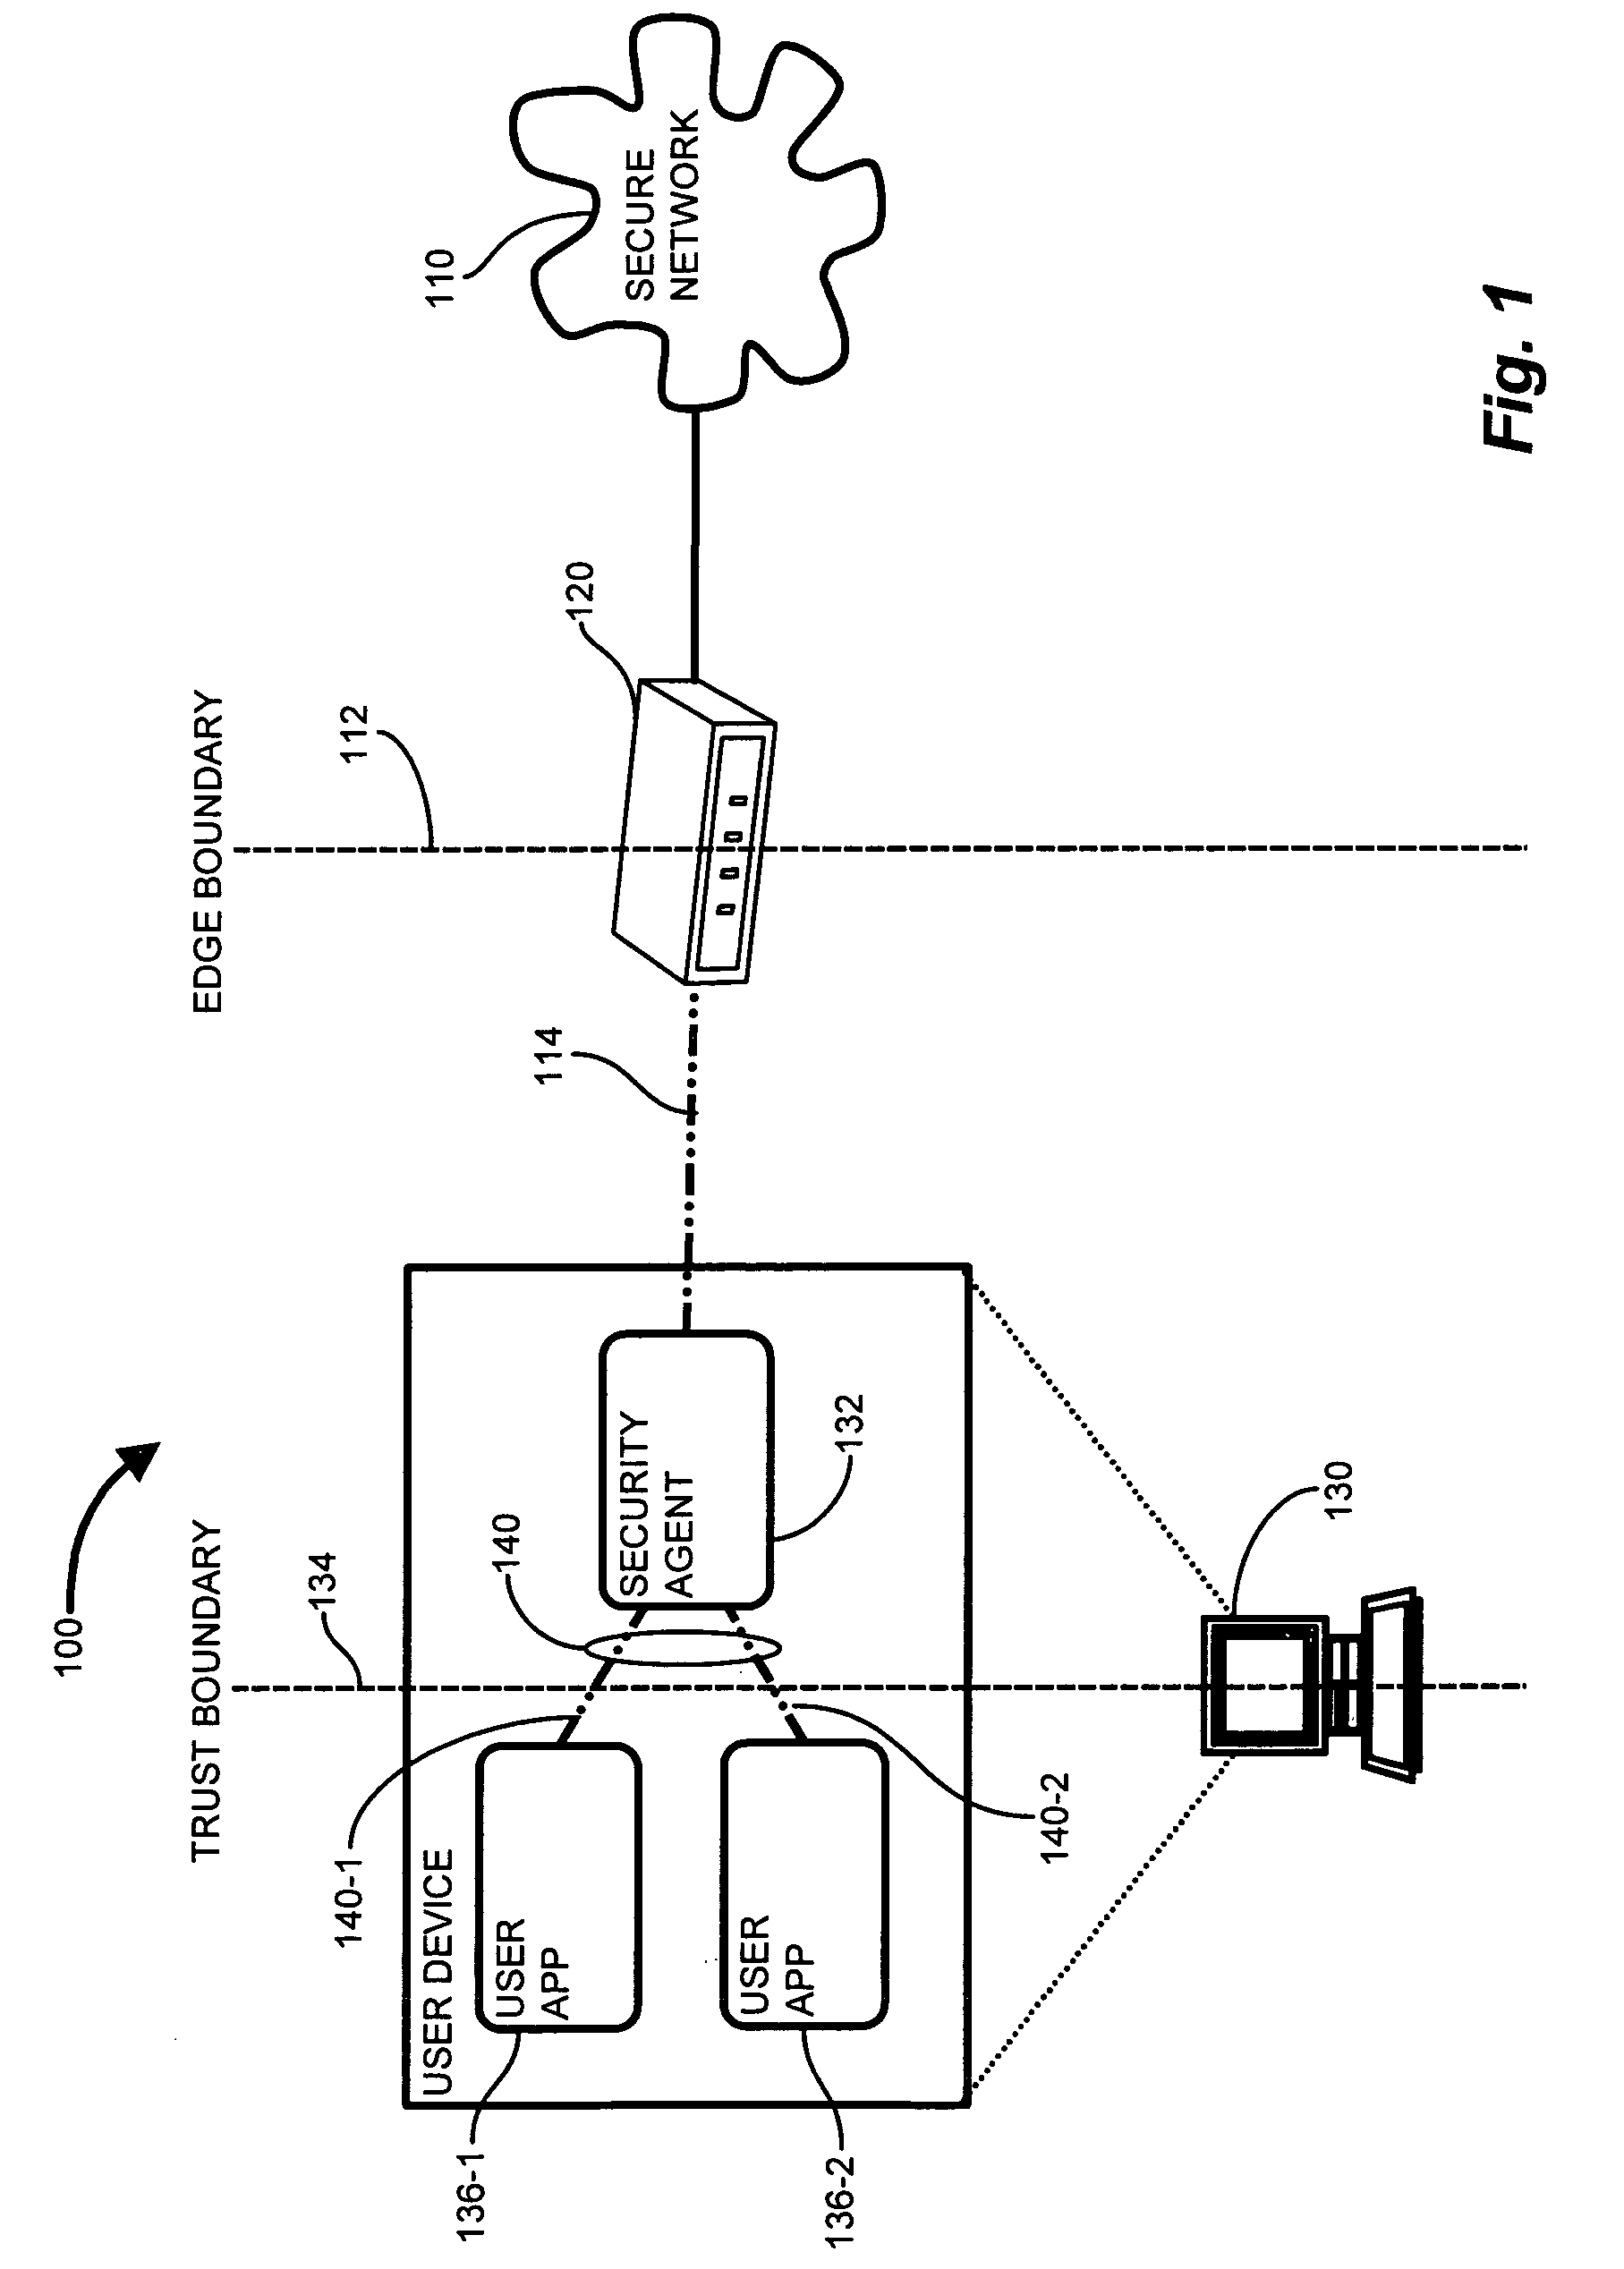 Methods and apparatus for trusted application centric QoS provisioning